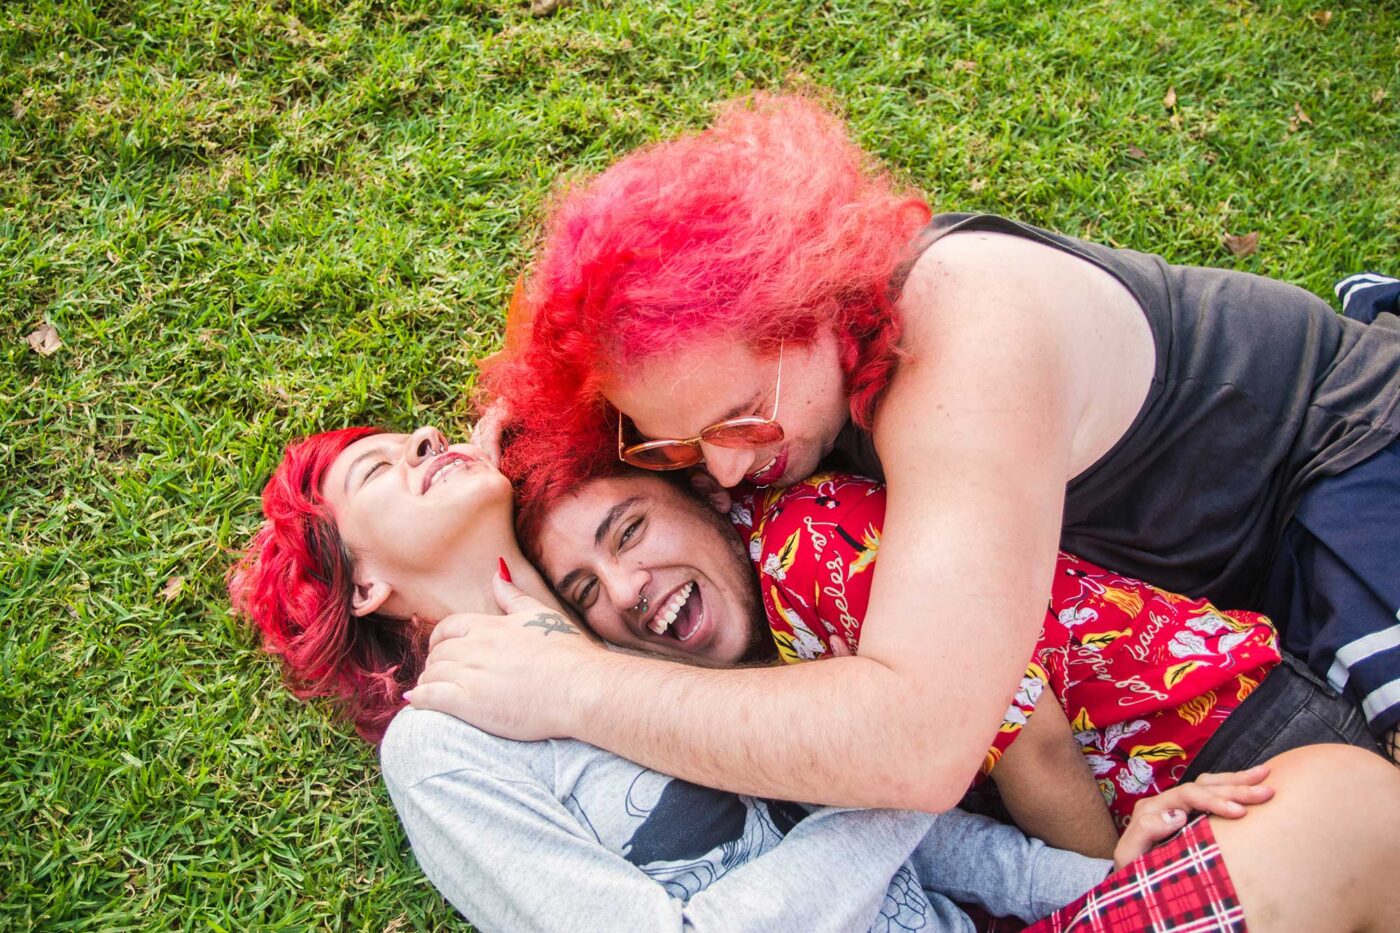 Three latino transgender friends are lying in the grass in a park hugging each other lovingly and having fun. LGBTQ friendship and community.